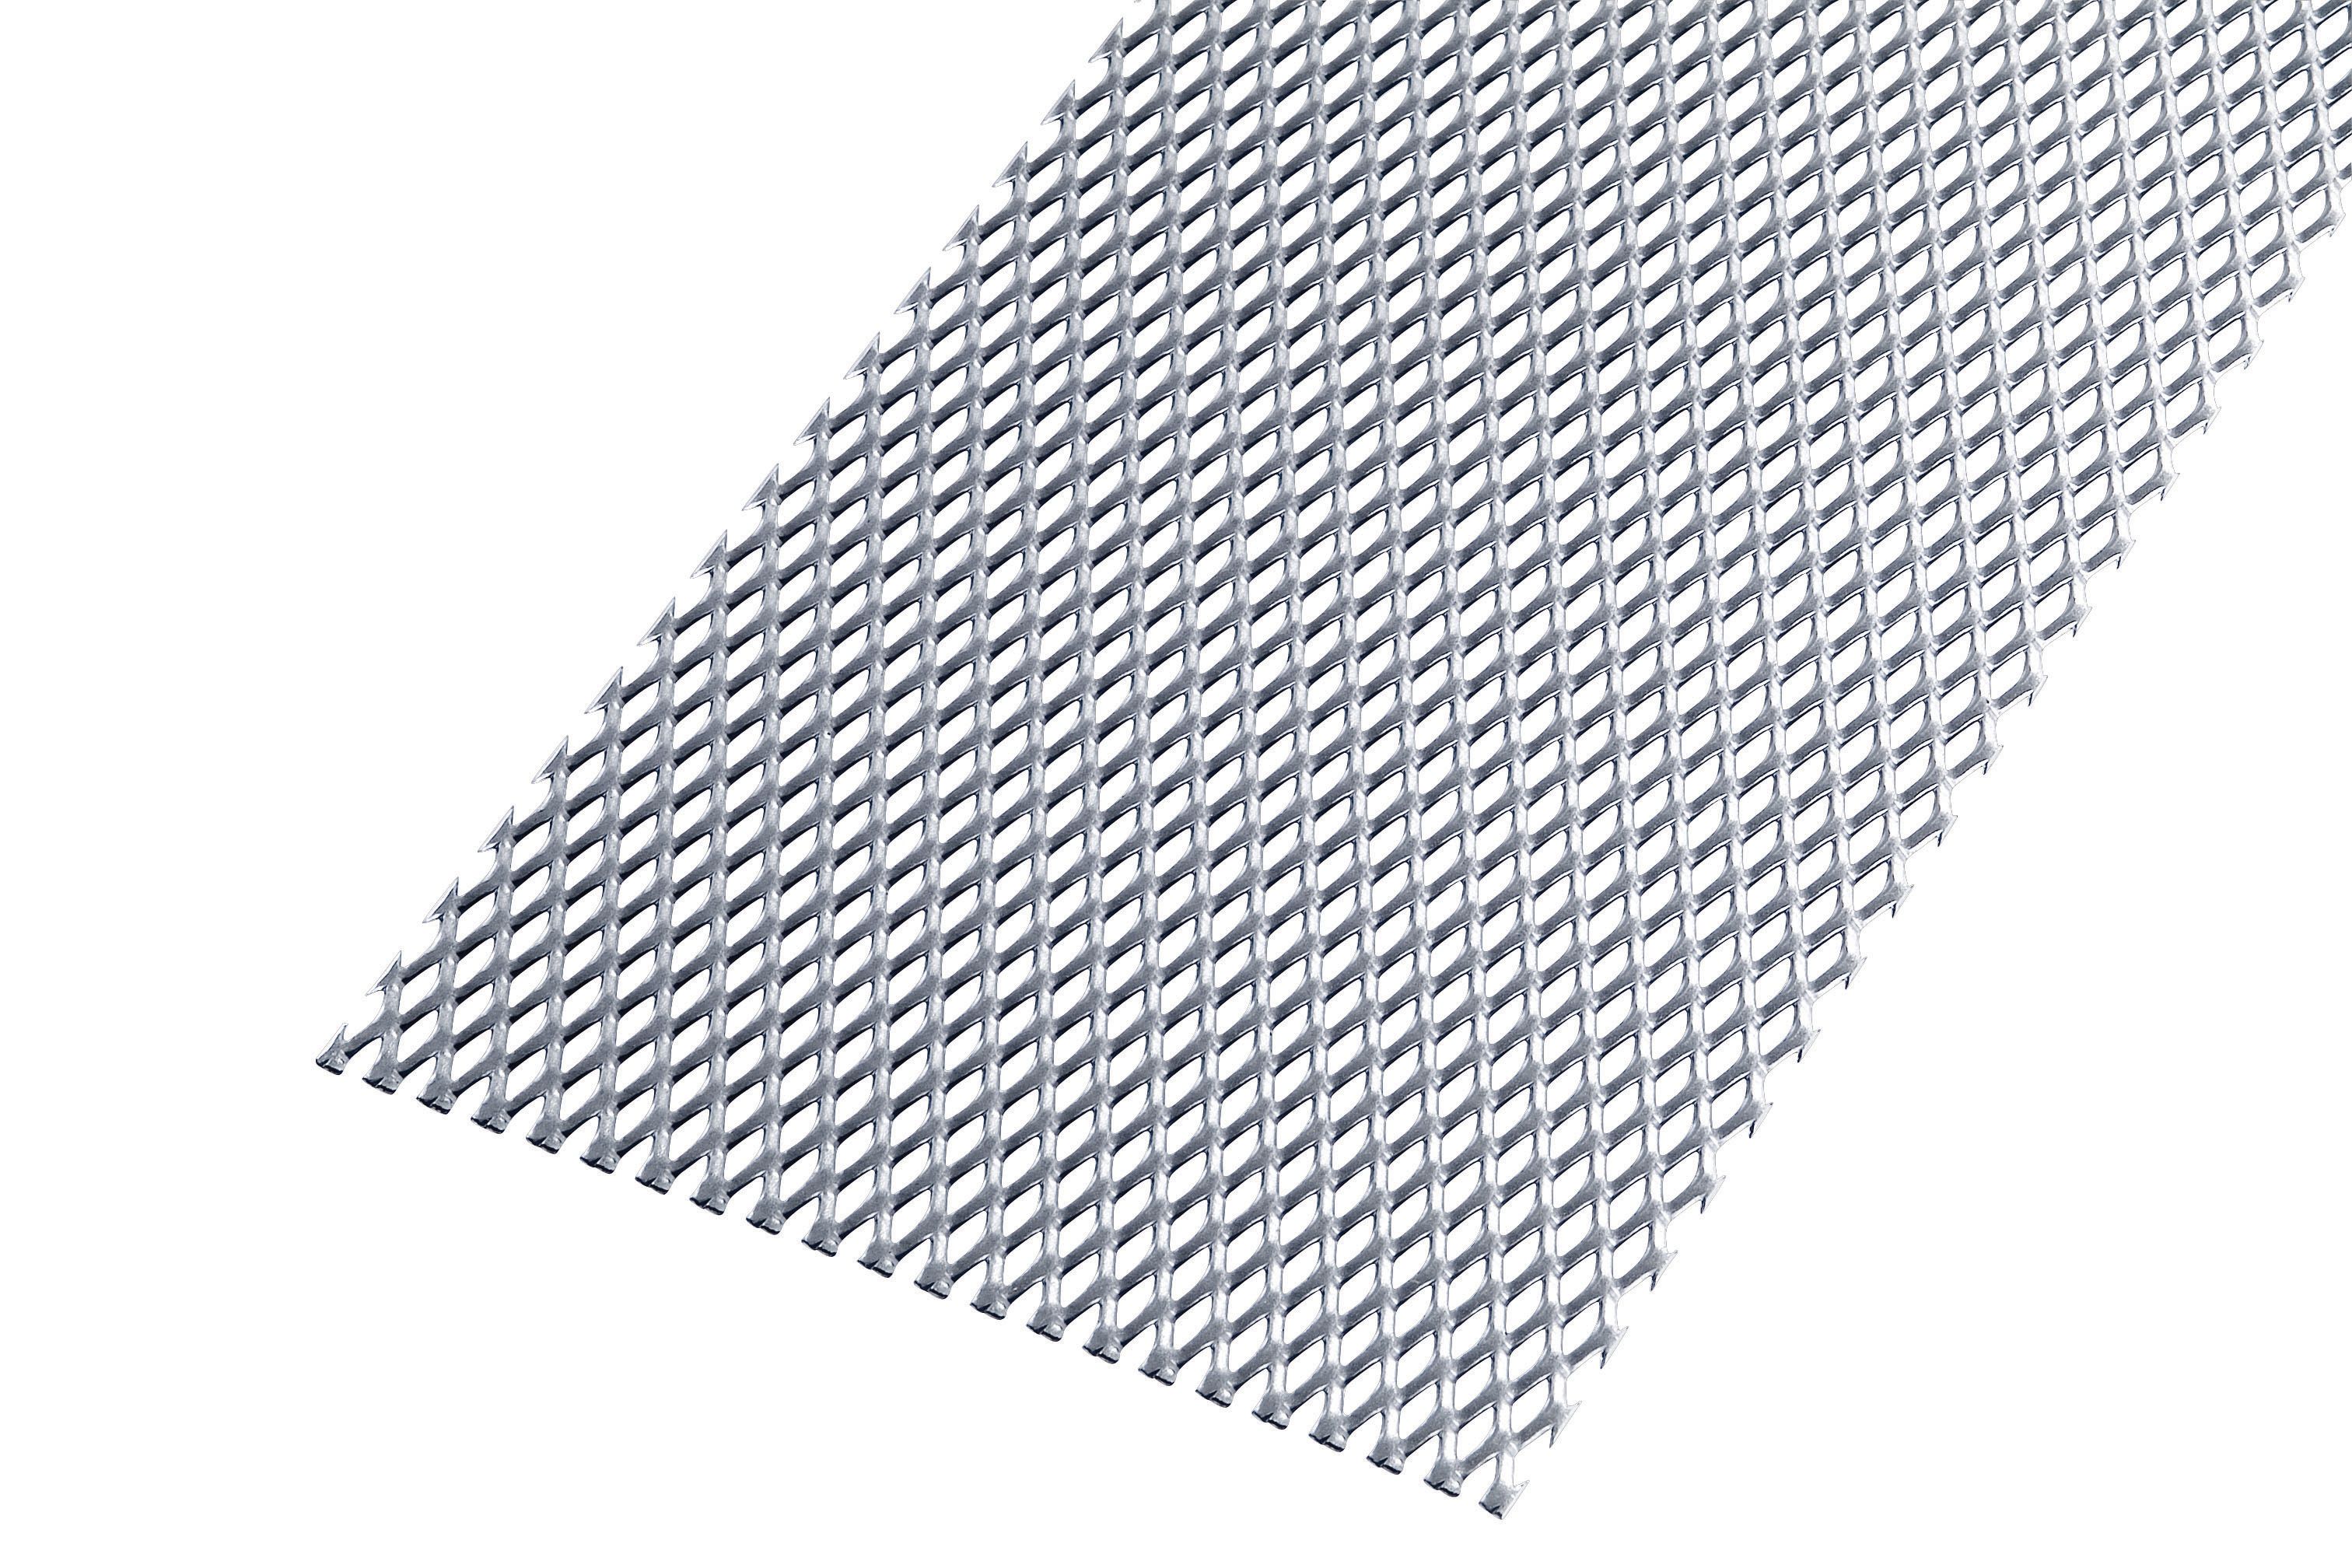 Rothley Perforated Steel Stretched Metal Sheet - 300 x 1.20 x 1000mm